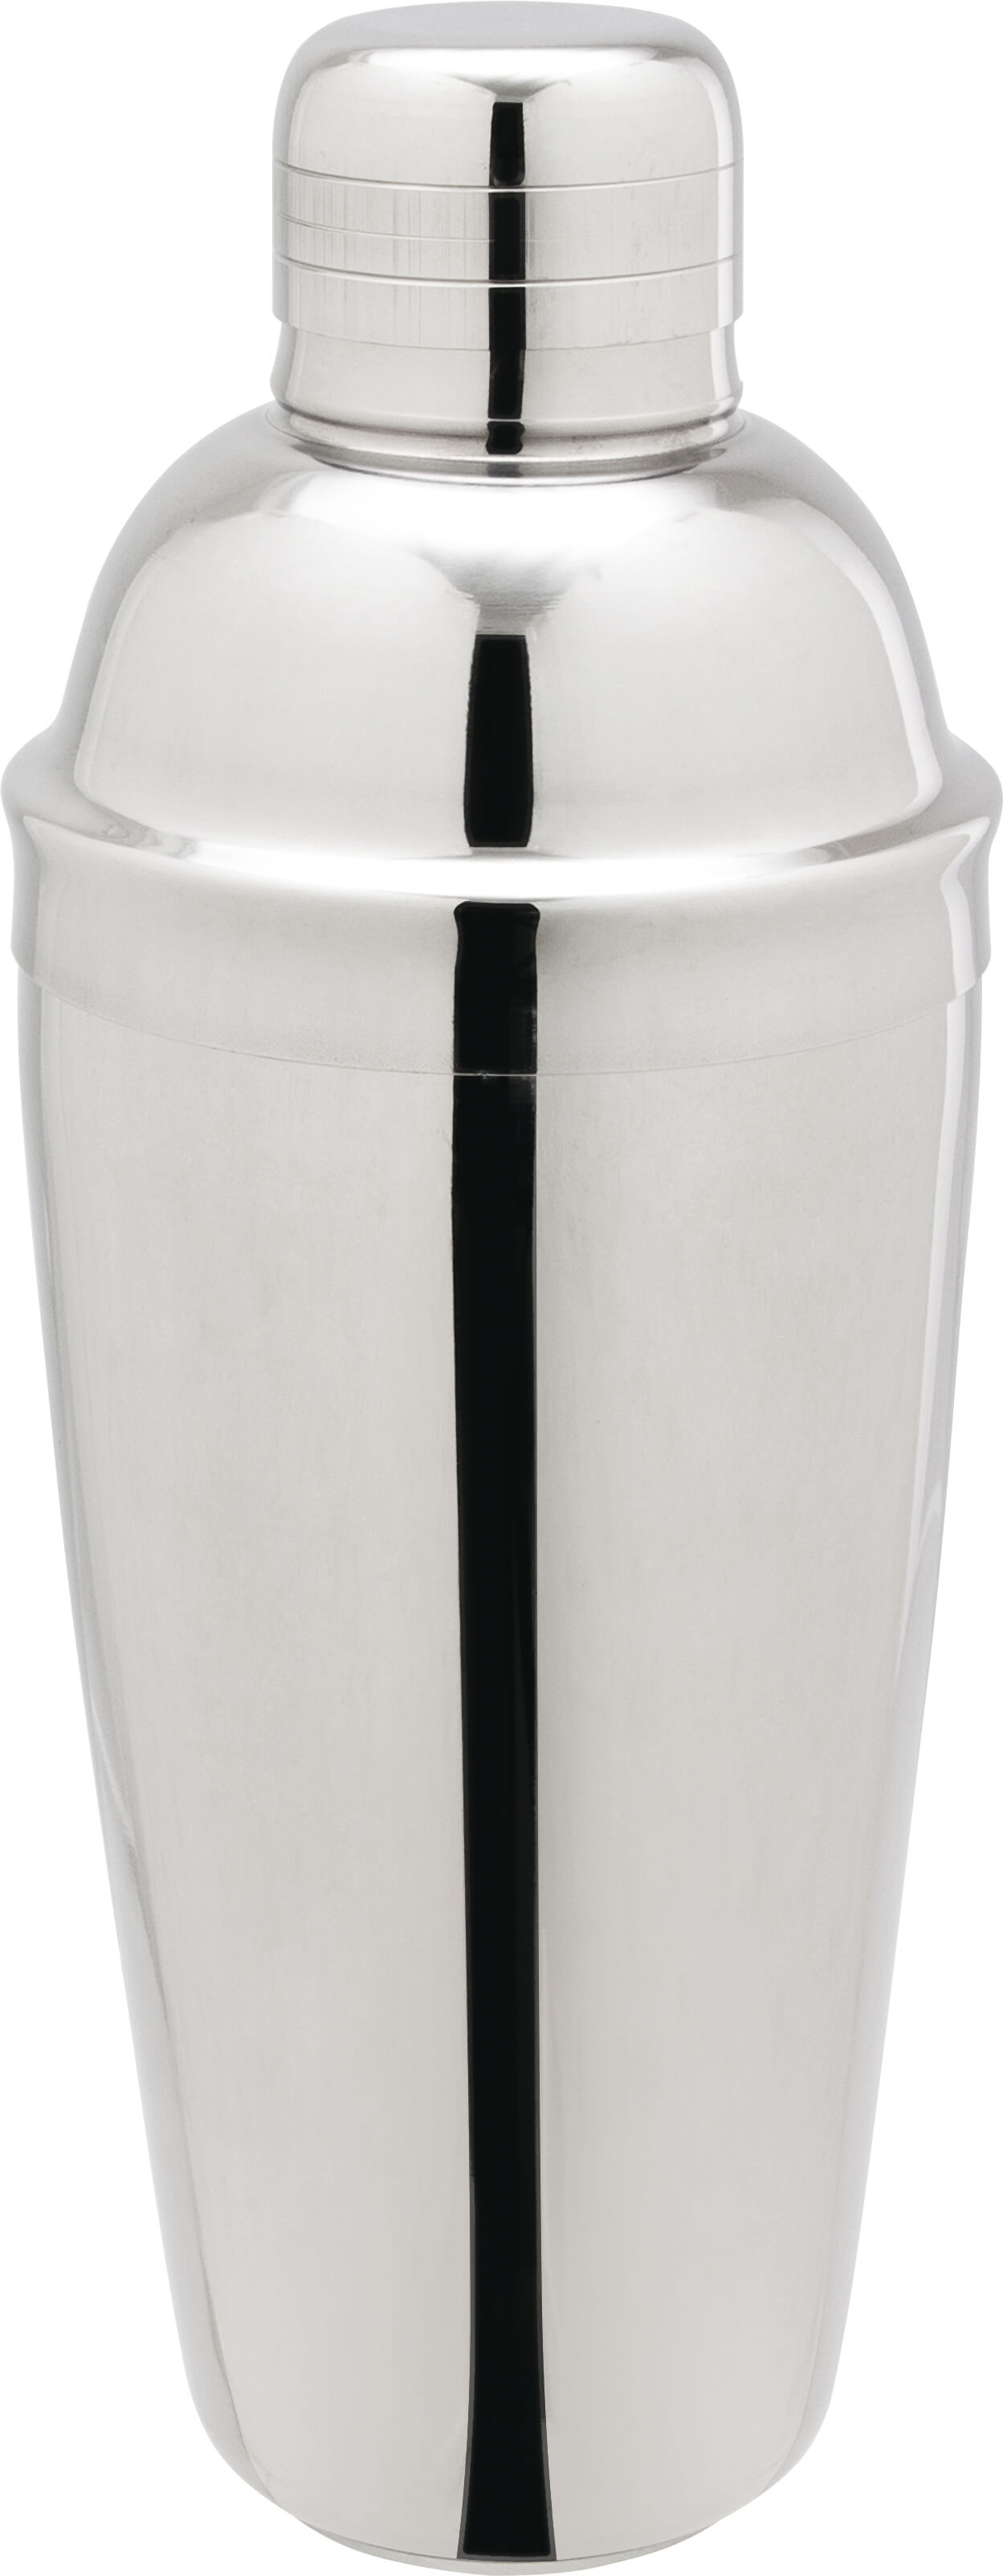 Cocktail shaker, stainless steel, tripartite, polished - 700ml